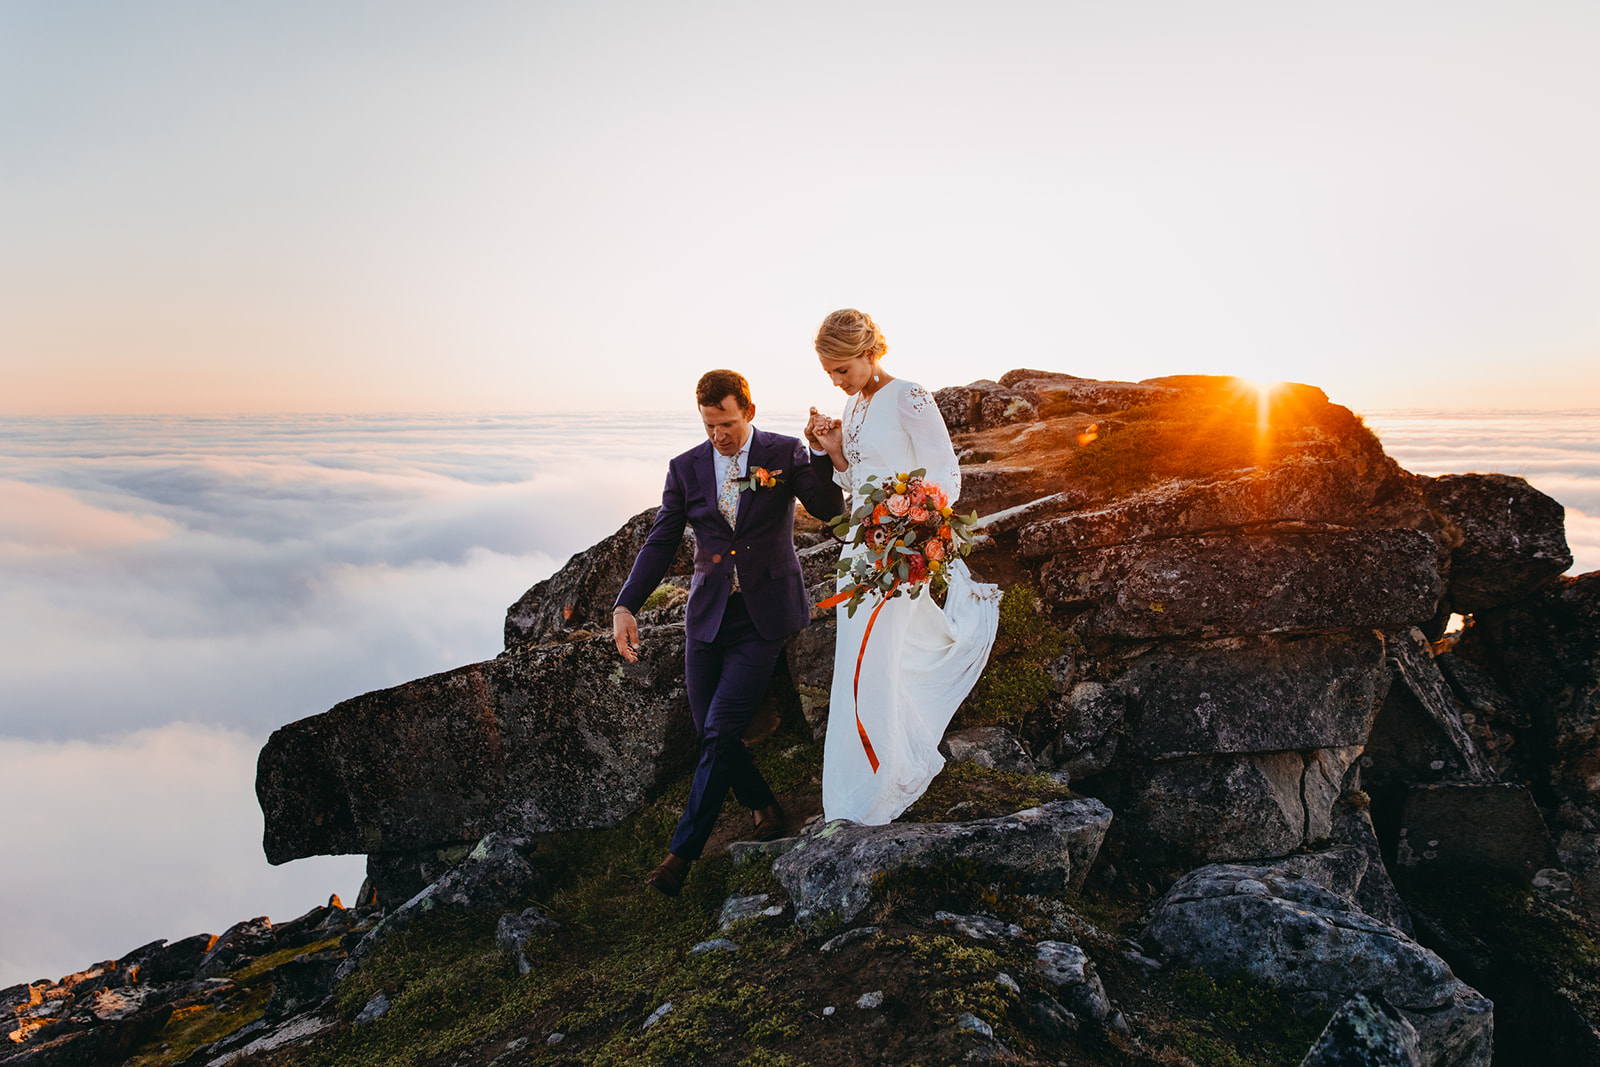 Eloping above the clouds in Lofoten. By Christin Eide Photography